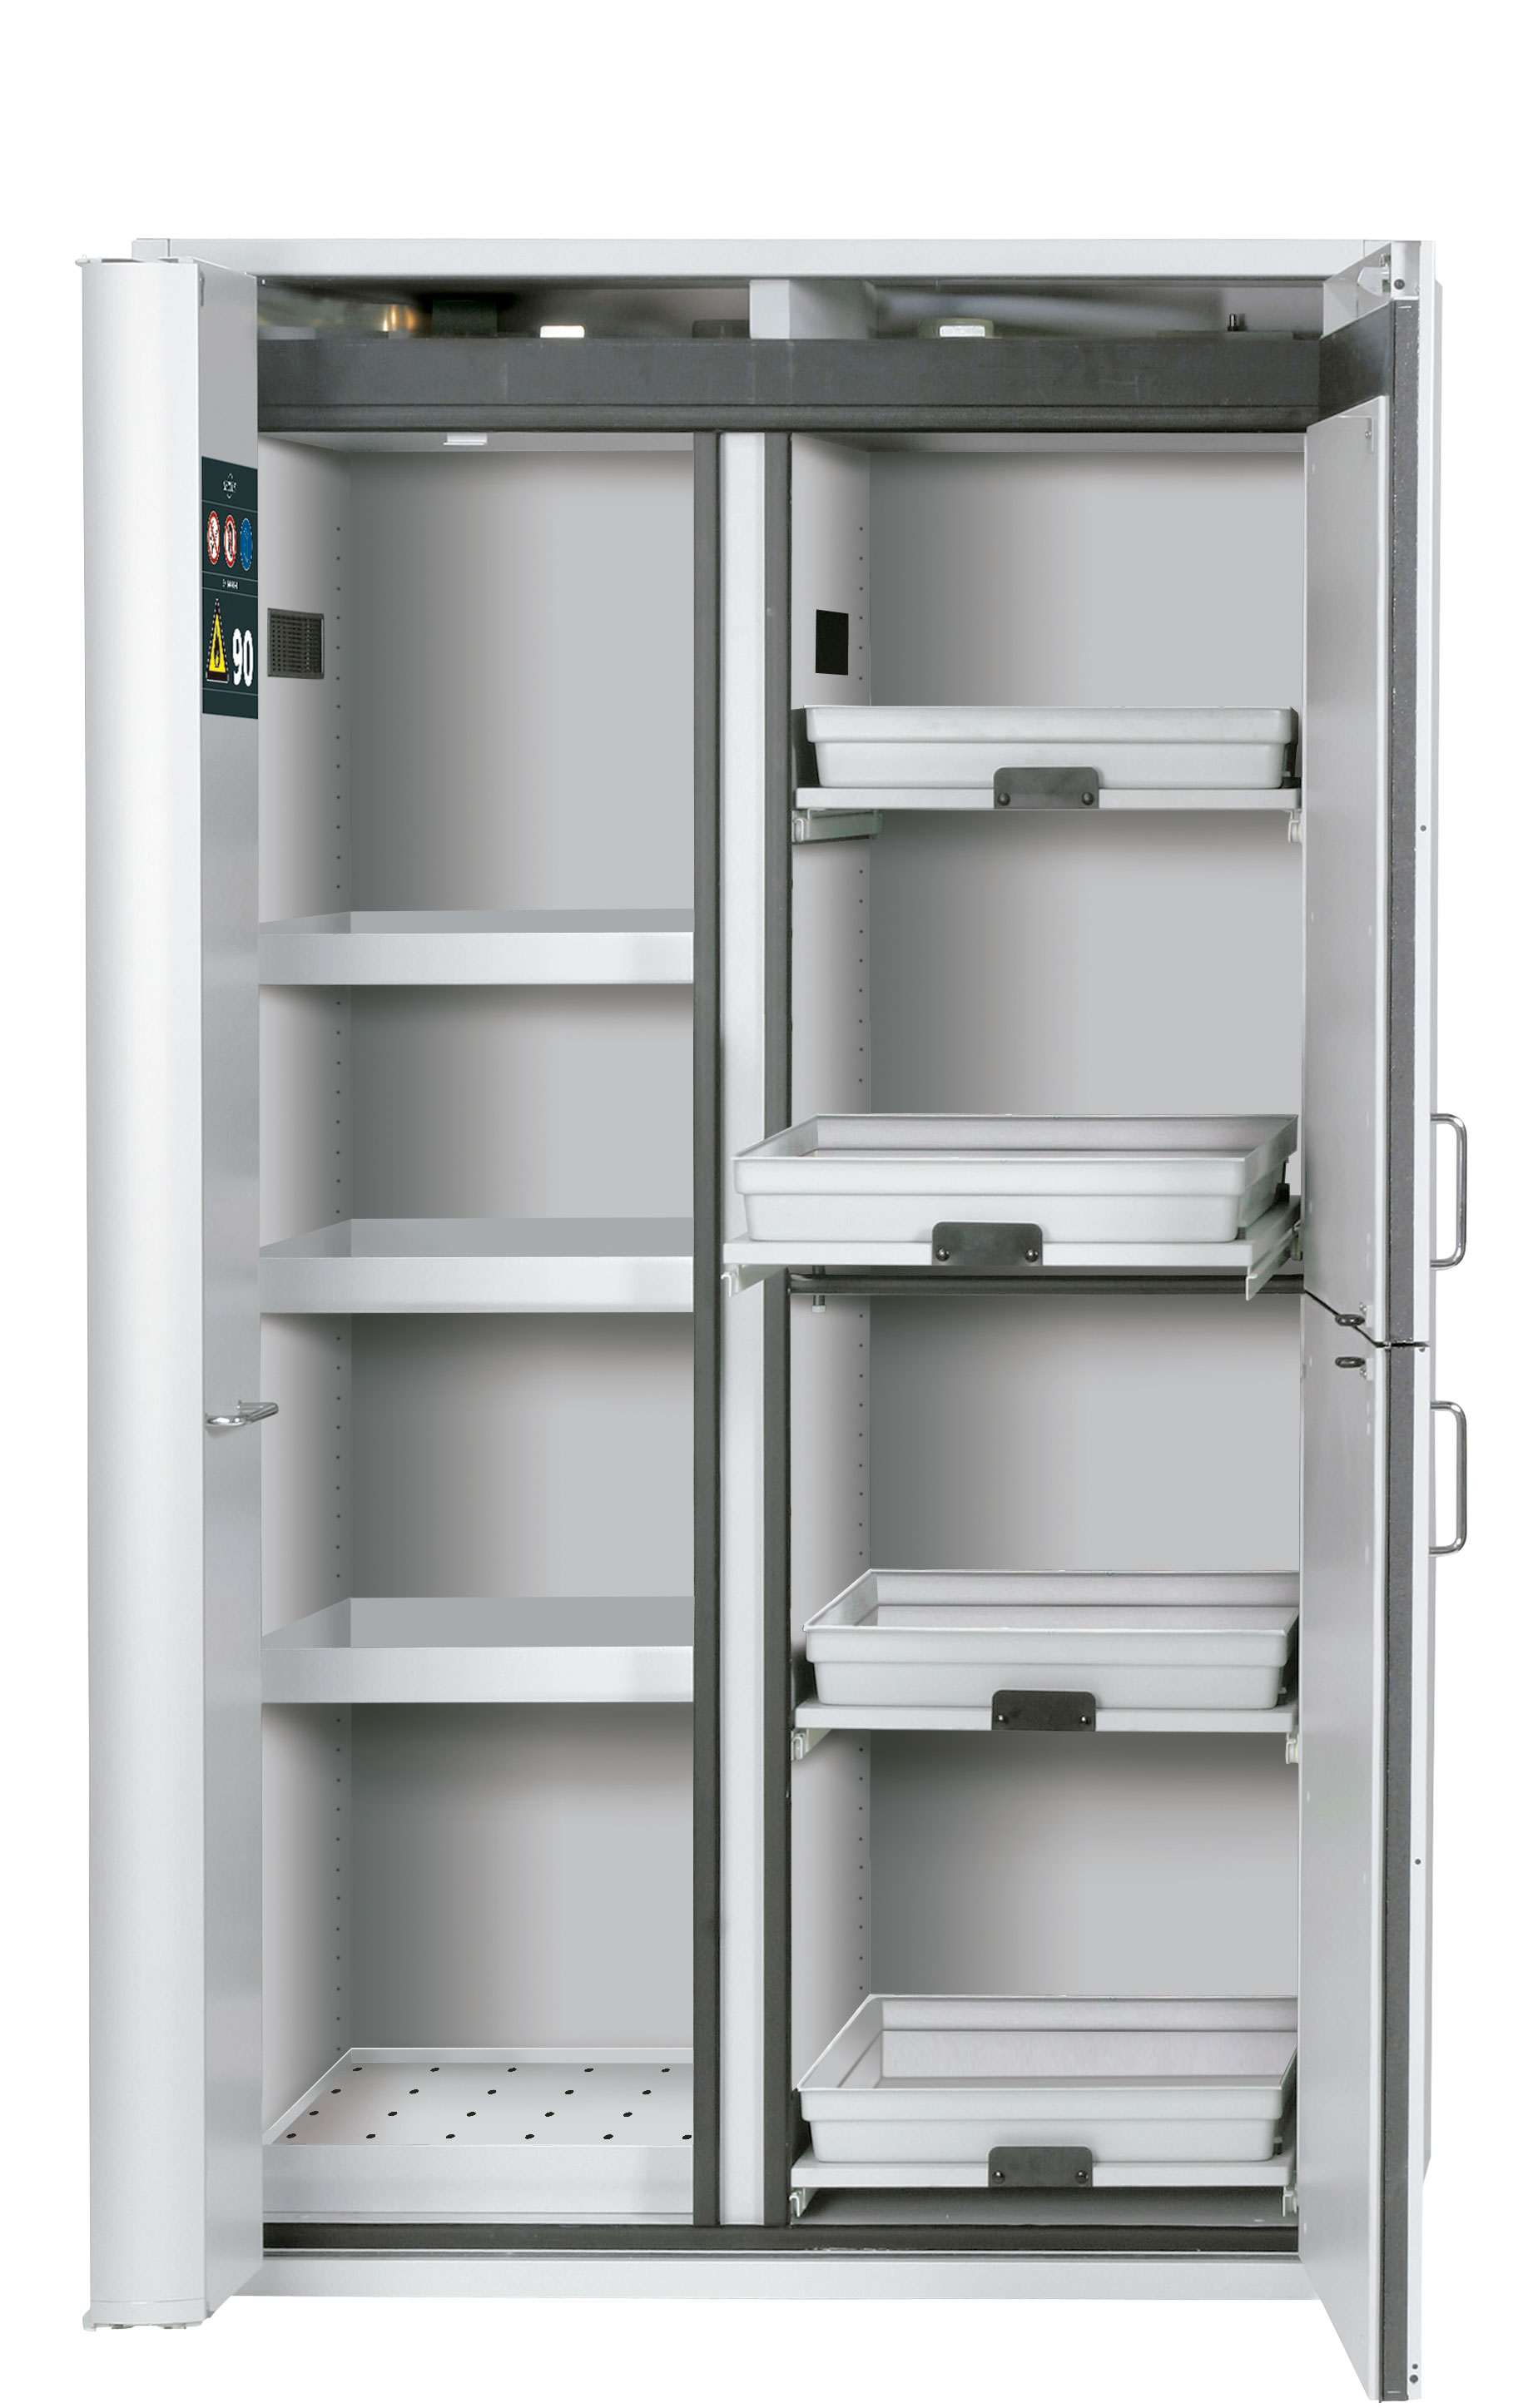 Cabinets for combined storage of chemical products